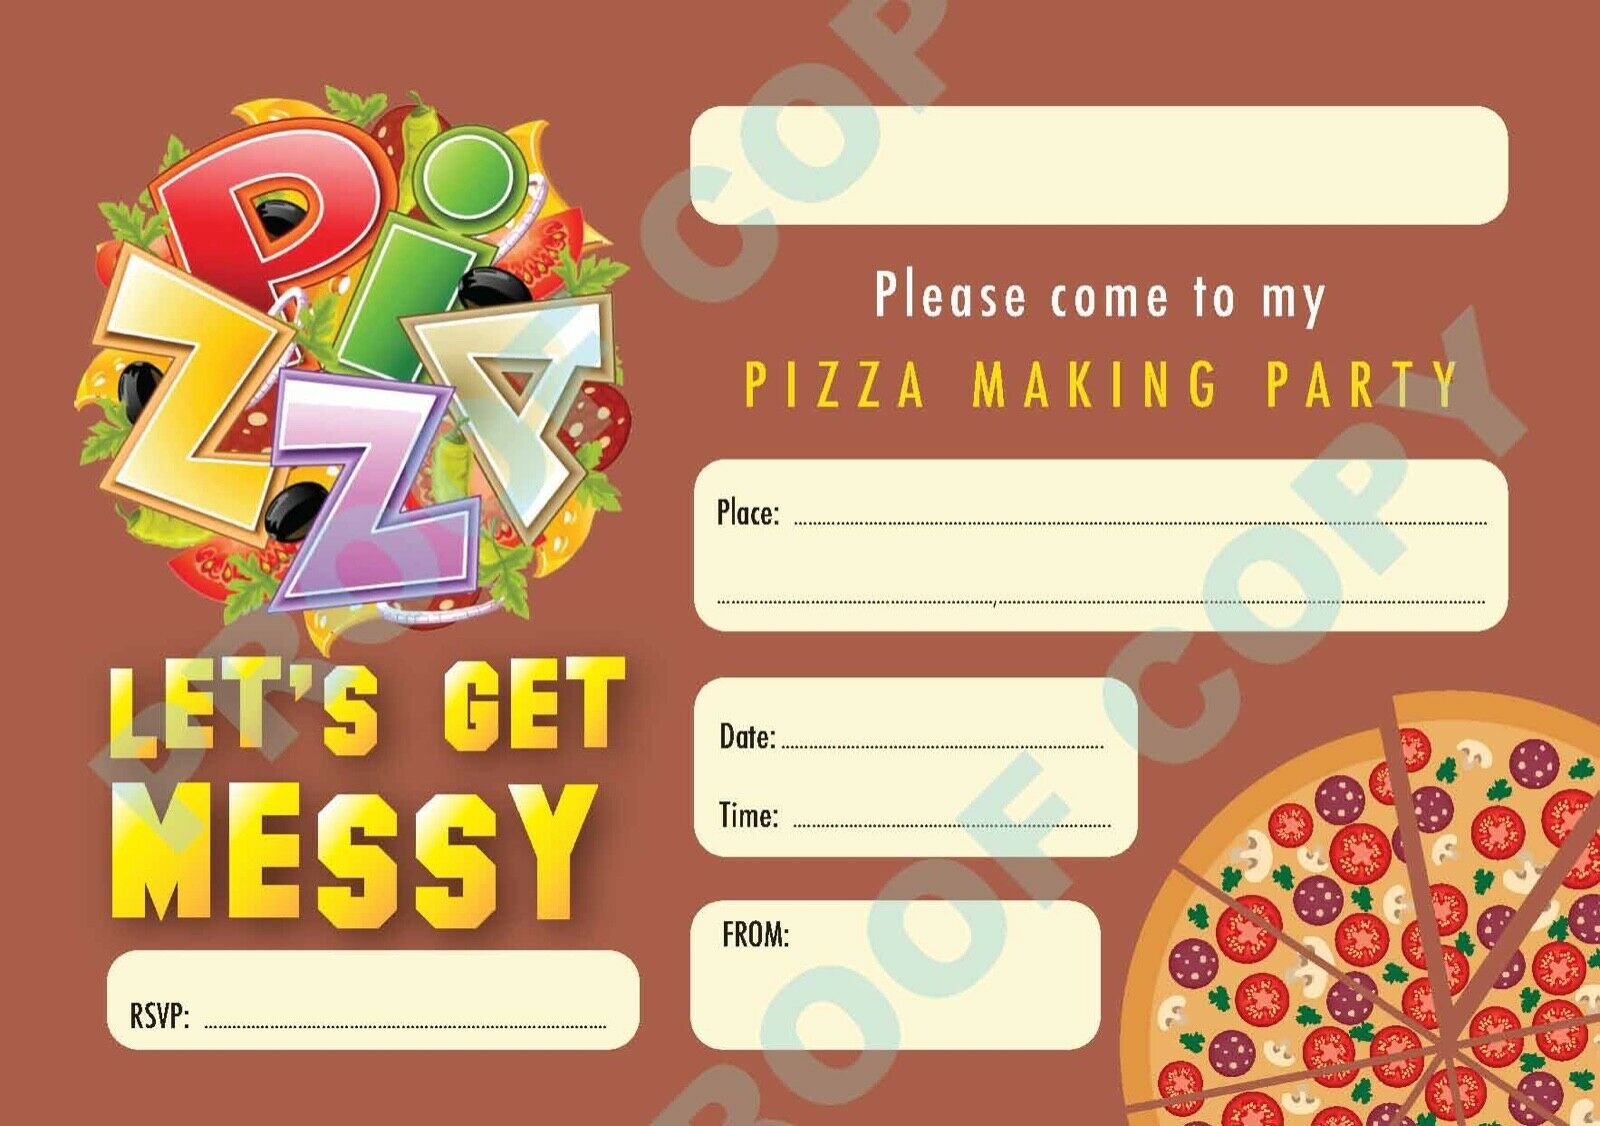 #68 Pizza Making Party Invitations x10